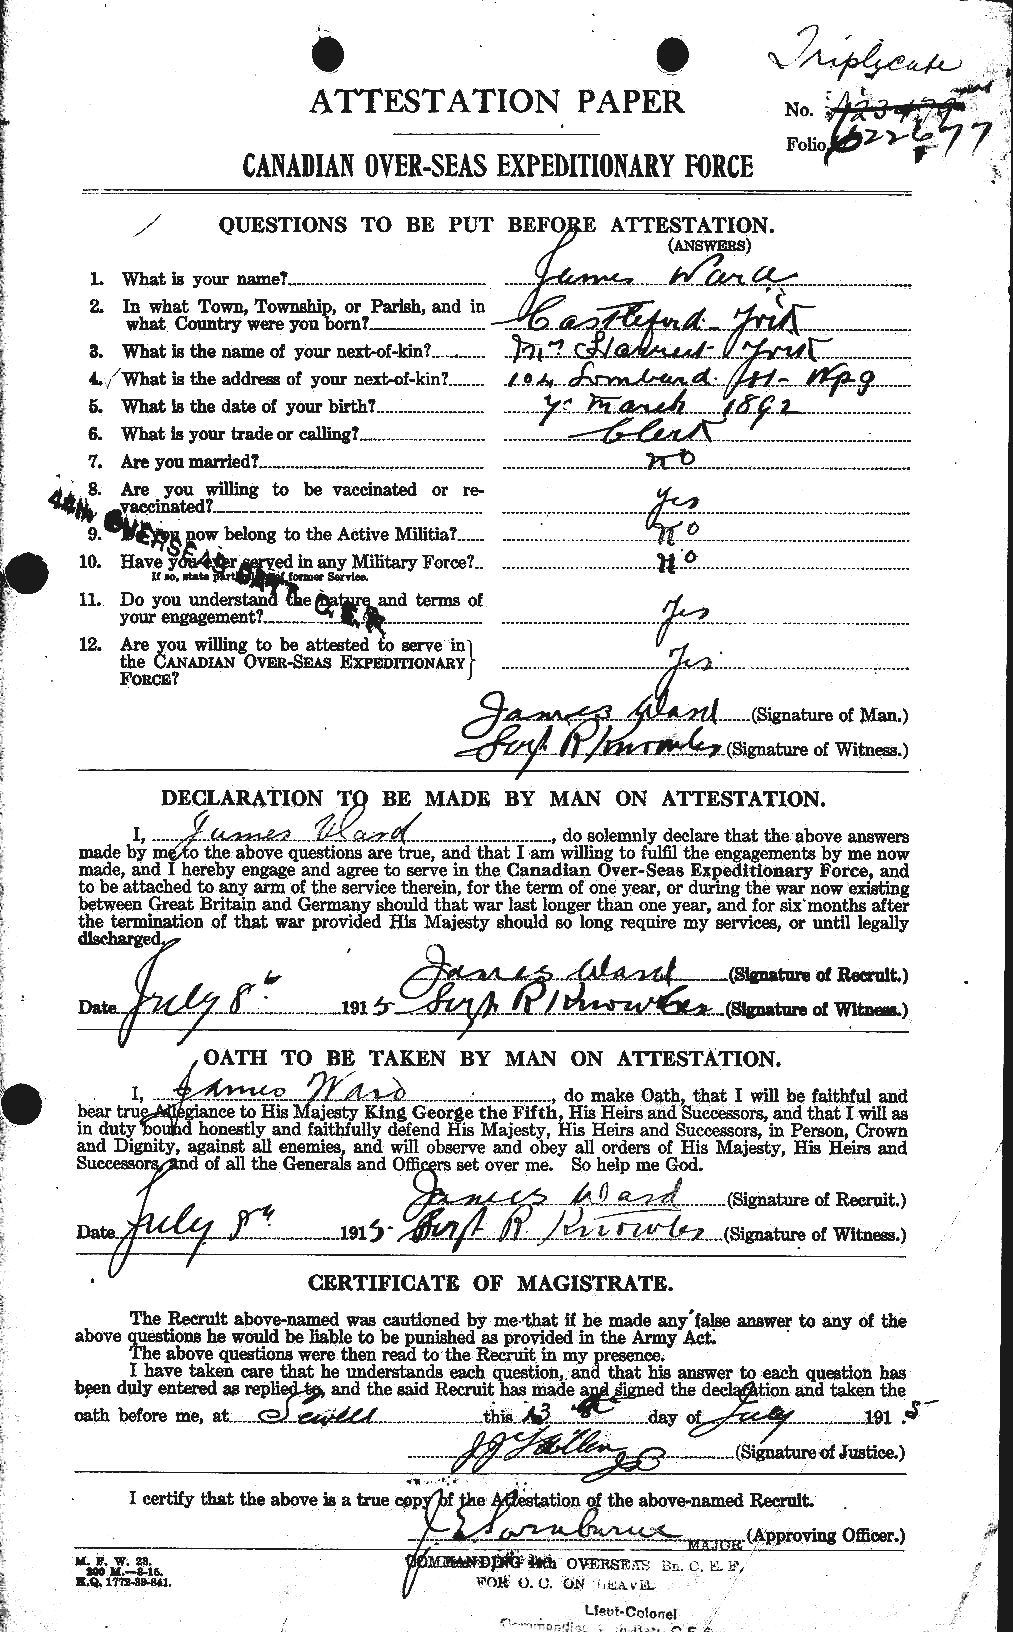 Personnel Records of the First World War - CEF 657897a